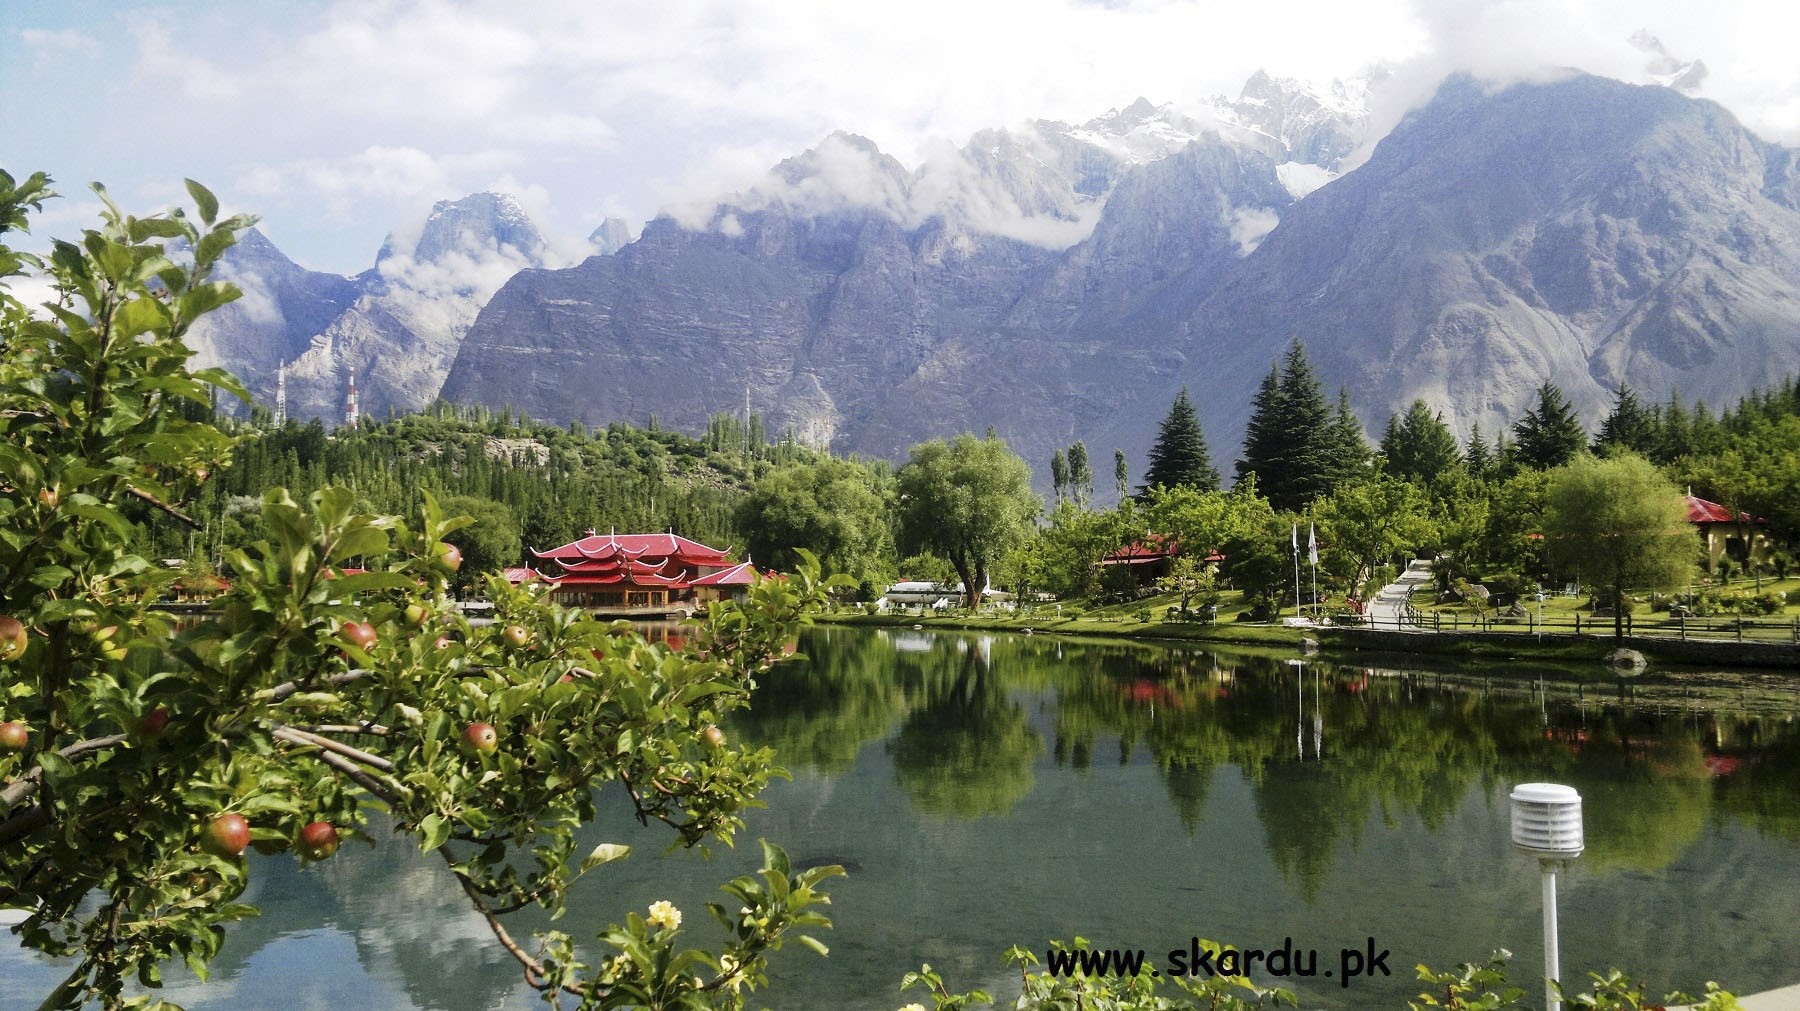 Pakistanu2019s northern Gilgit-Baltistan region alone has 30 languages  spoken from the Indic, Indo-Iranian, and Sino-Tibetan families.